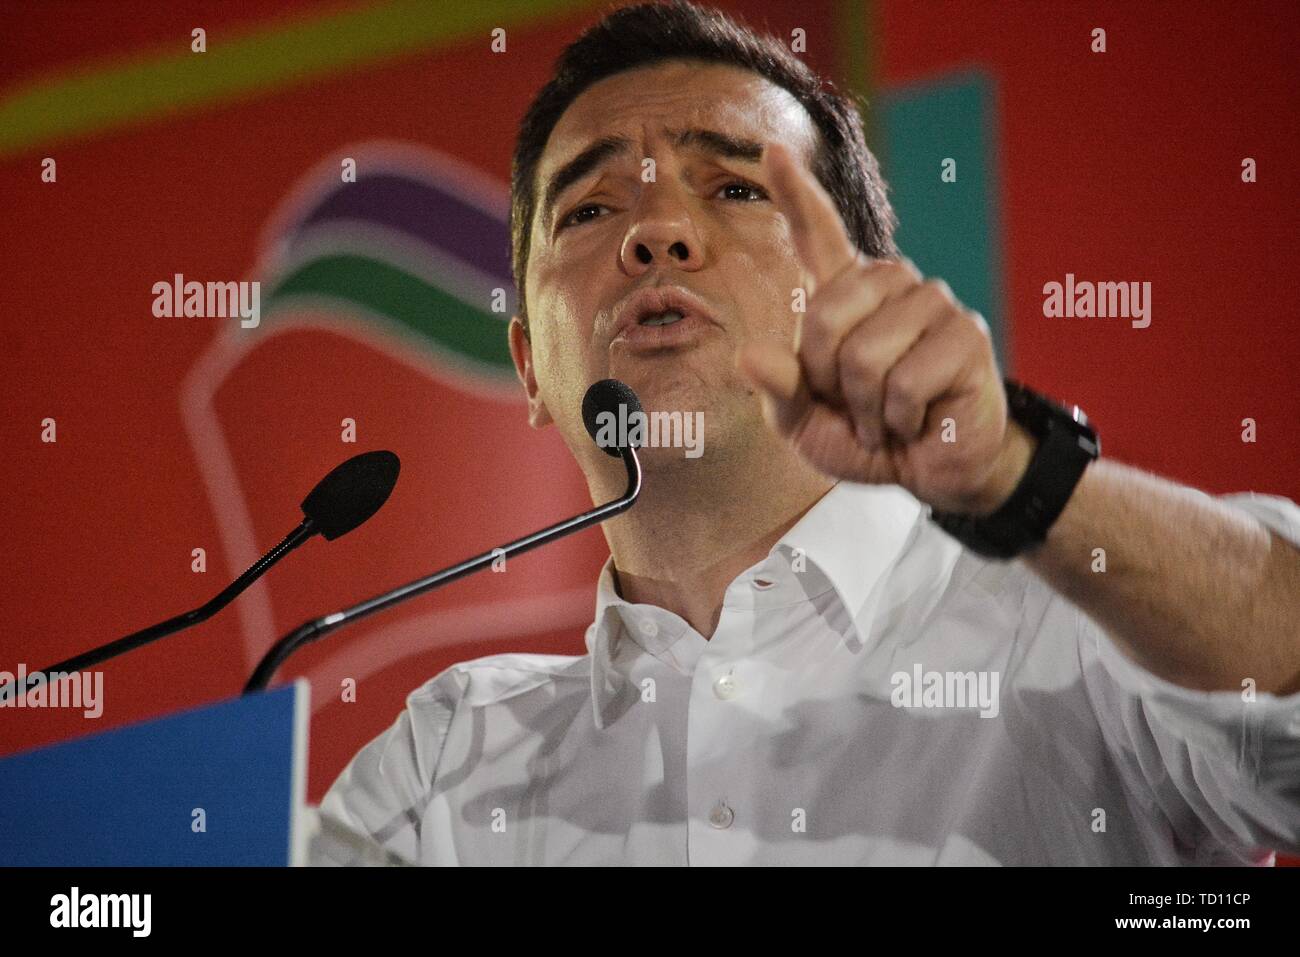 Athens, Greece. 10th June, 2019. Greek Prime Minister, Alexis Tsipras, speaks while making a gesture during the Presentation of the Political Program of SYRIZA at the Athens Concert Hall. Credit: SOPA Images Limited/Alamy Live News Stock Photo